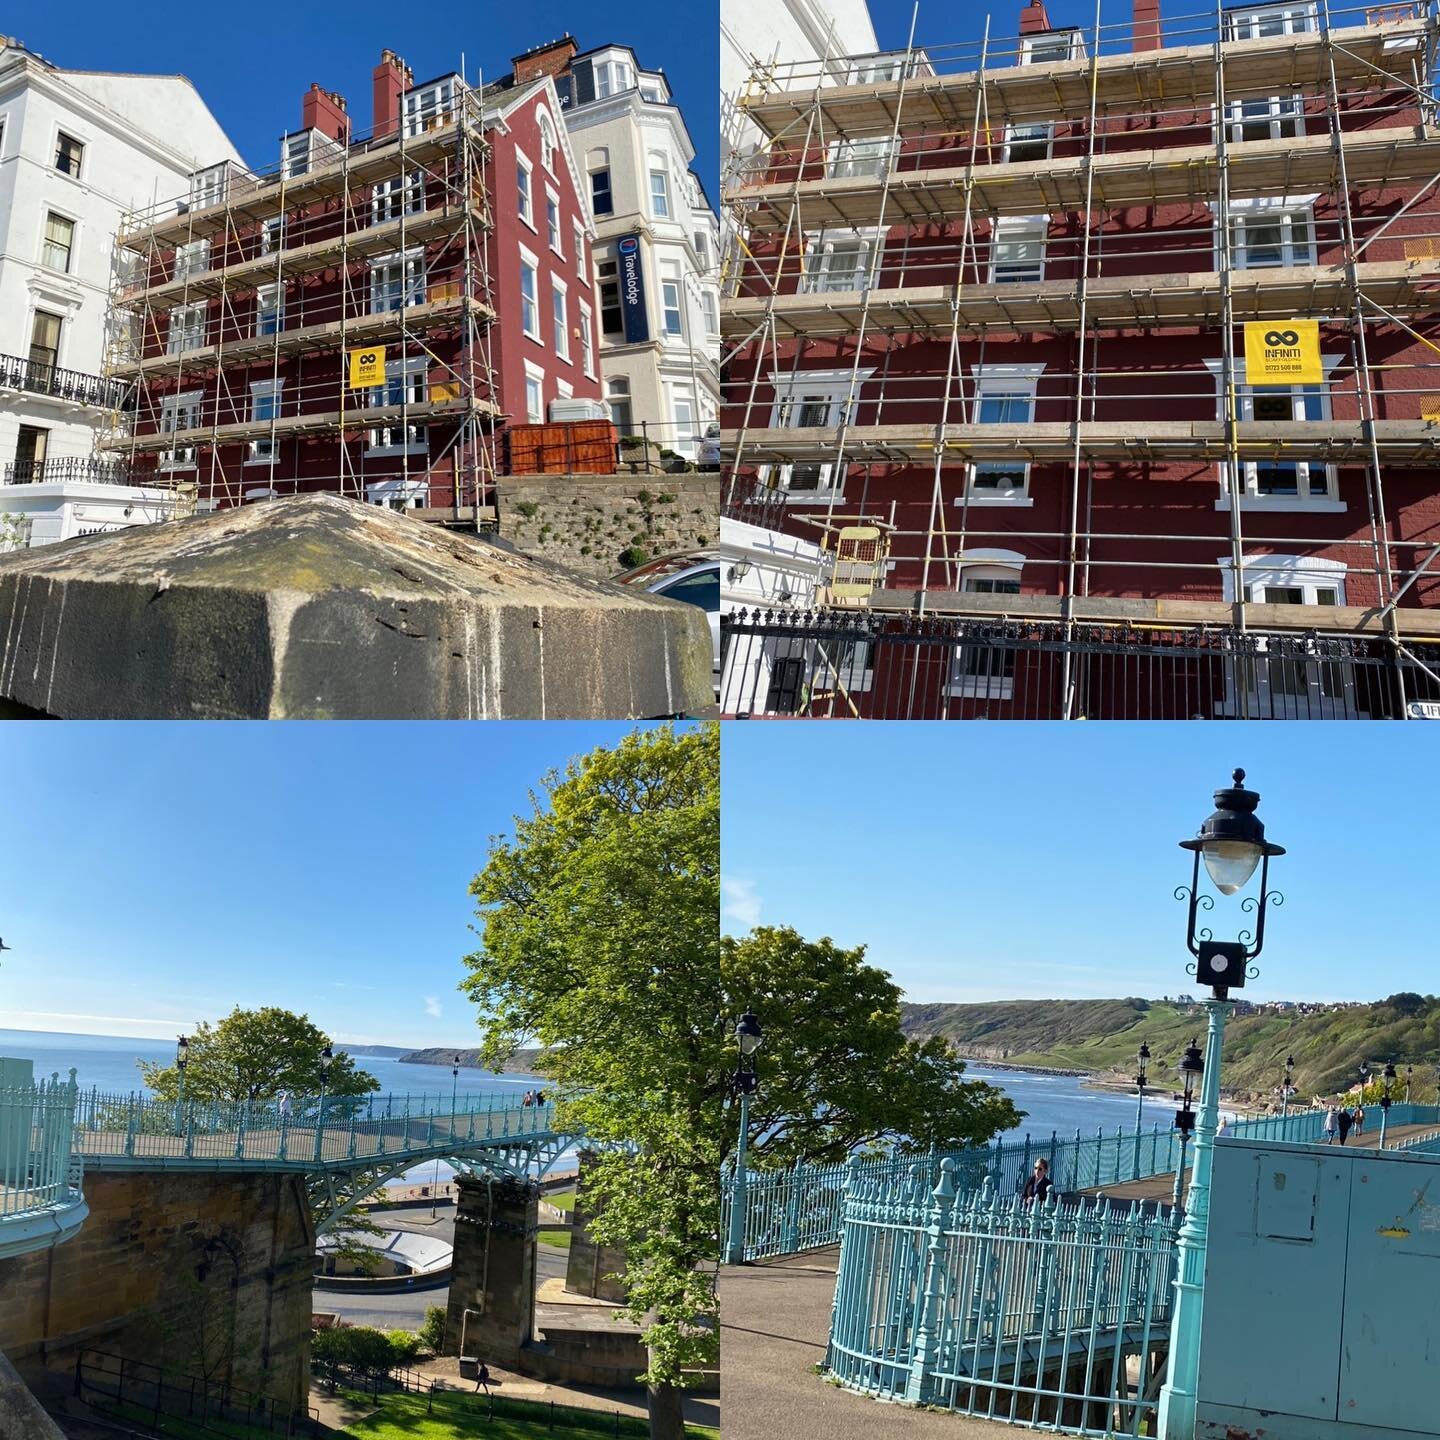 The Red House, Cliff Terrace Scaffolding being dismantled having been nicely painted - Fantastic views of Scarborough for our guys whilst they work - it&rsquo;s such a pleasure to live by the sea🎉🎉